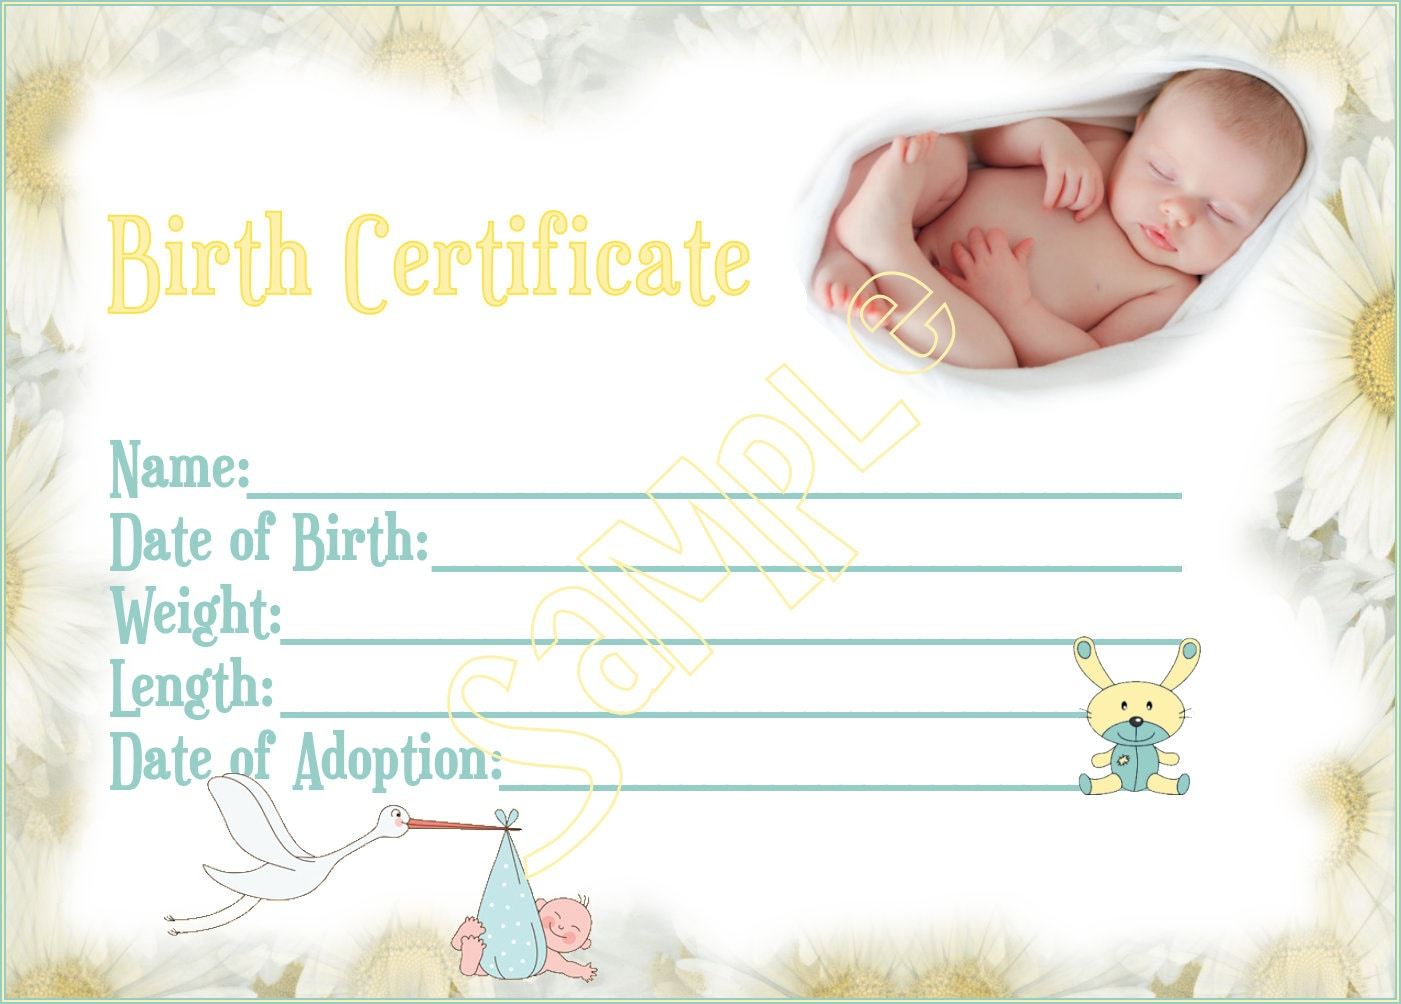 NEW ARRIVAL Reborn Baby Doll Birth Certificate Instant Download You Print  PNG Jpeg and Pdf files for 10x10 graphic Throughout Baby Doll Birth Certificate Template